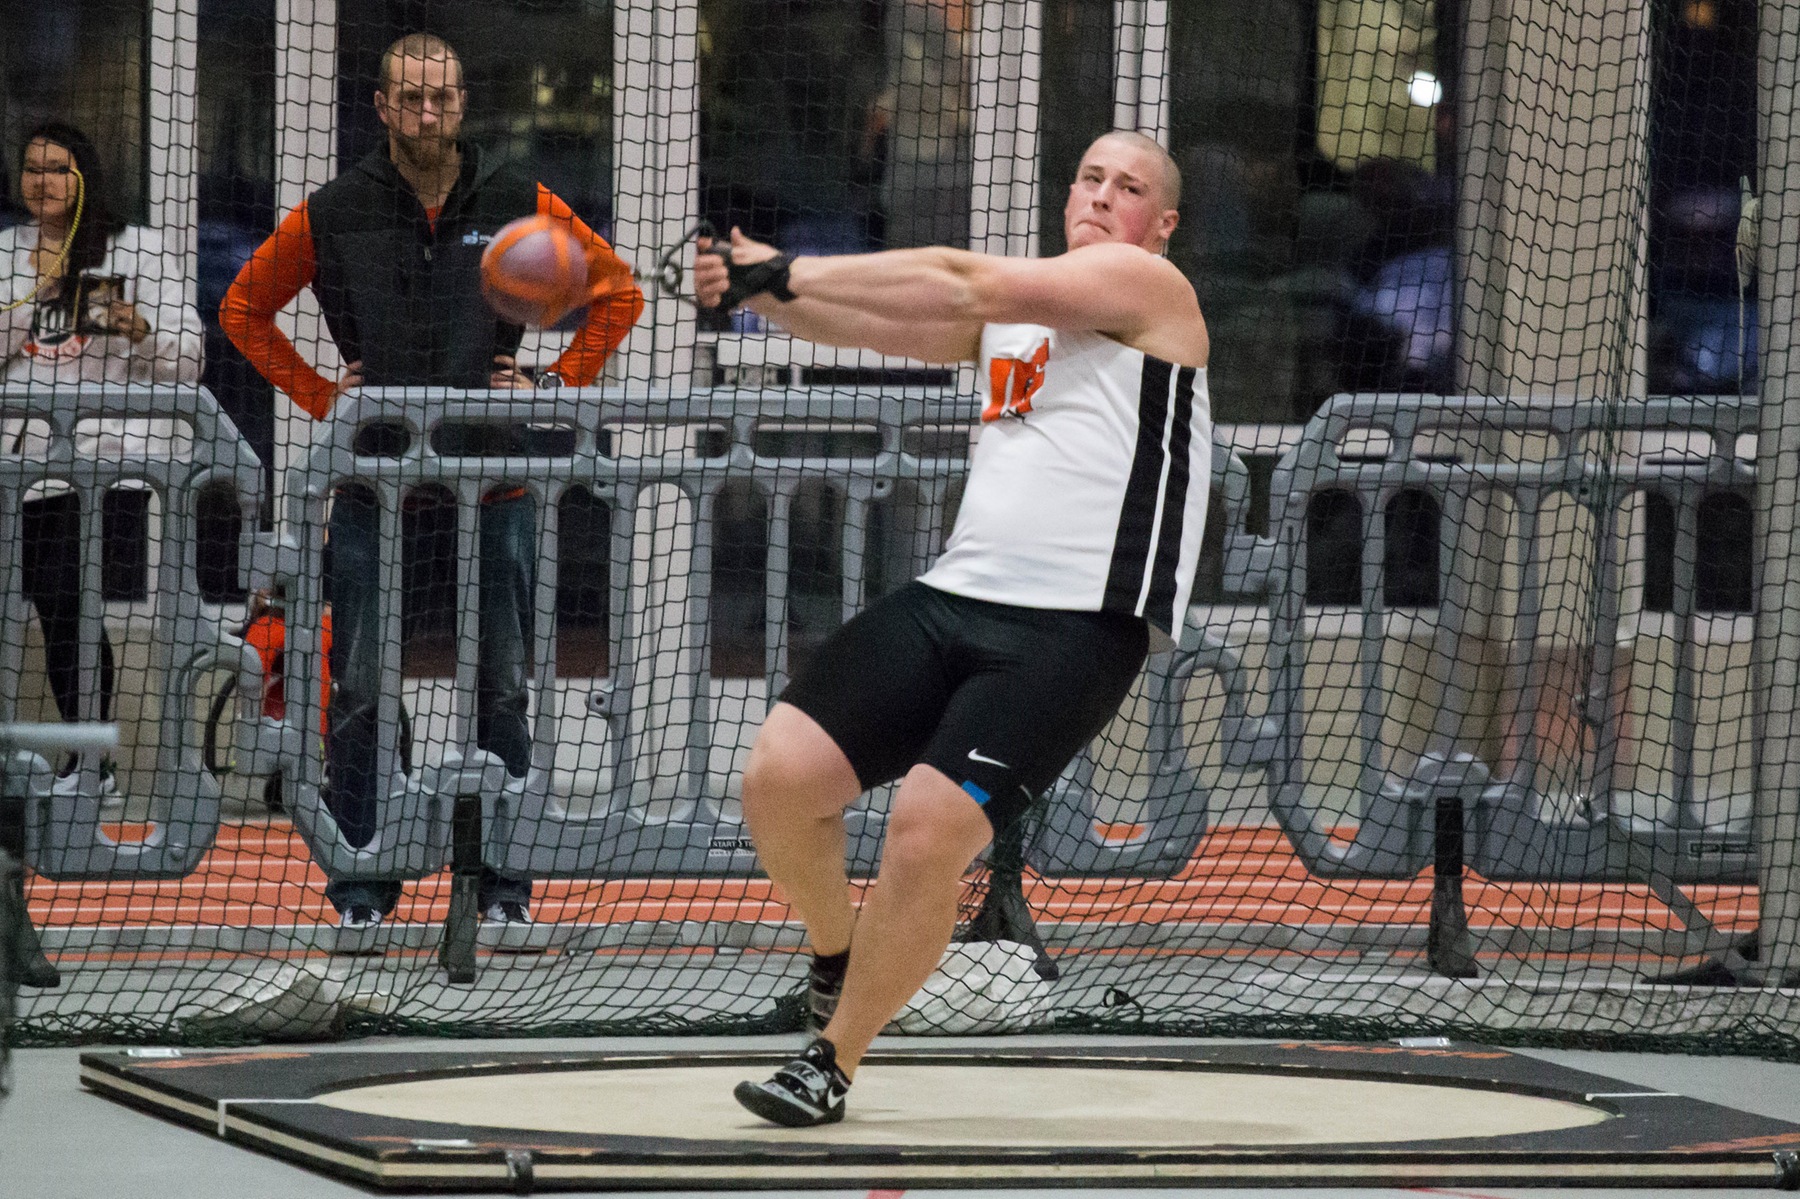 Austin Combs Wins National Title in Weight Throw